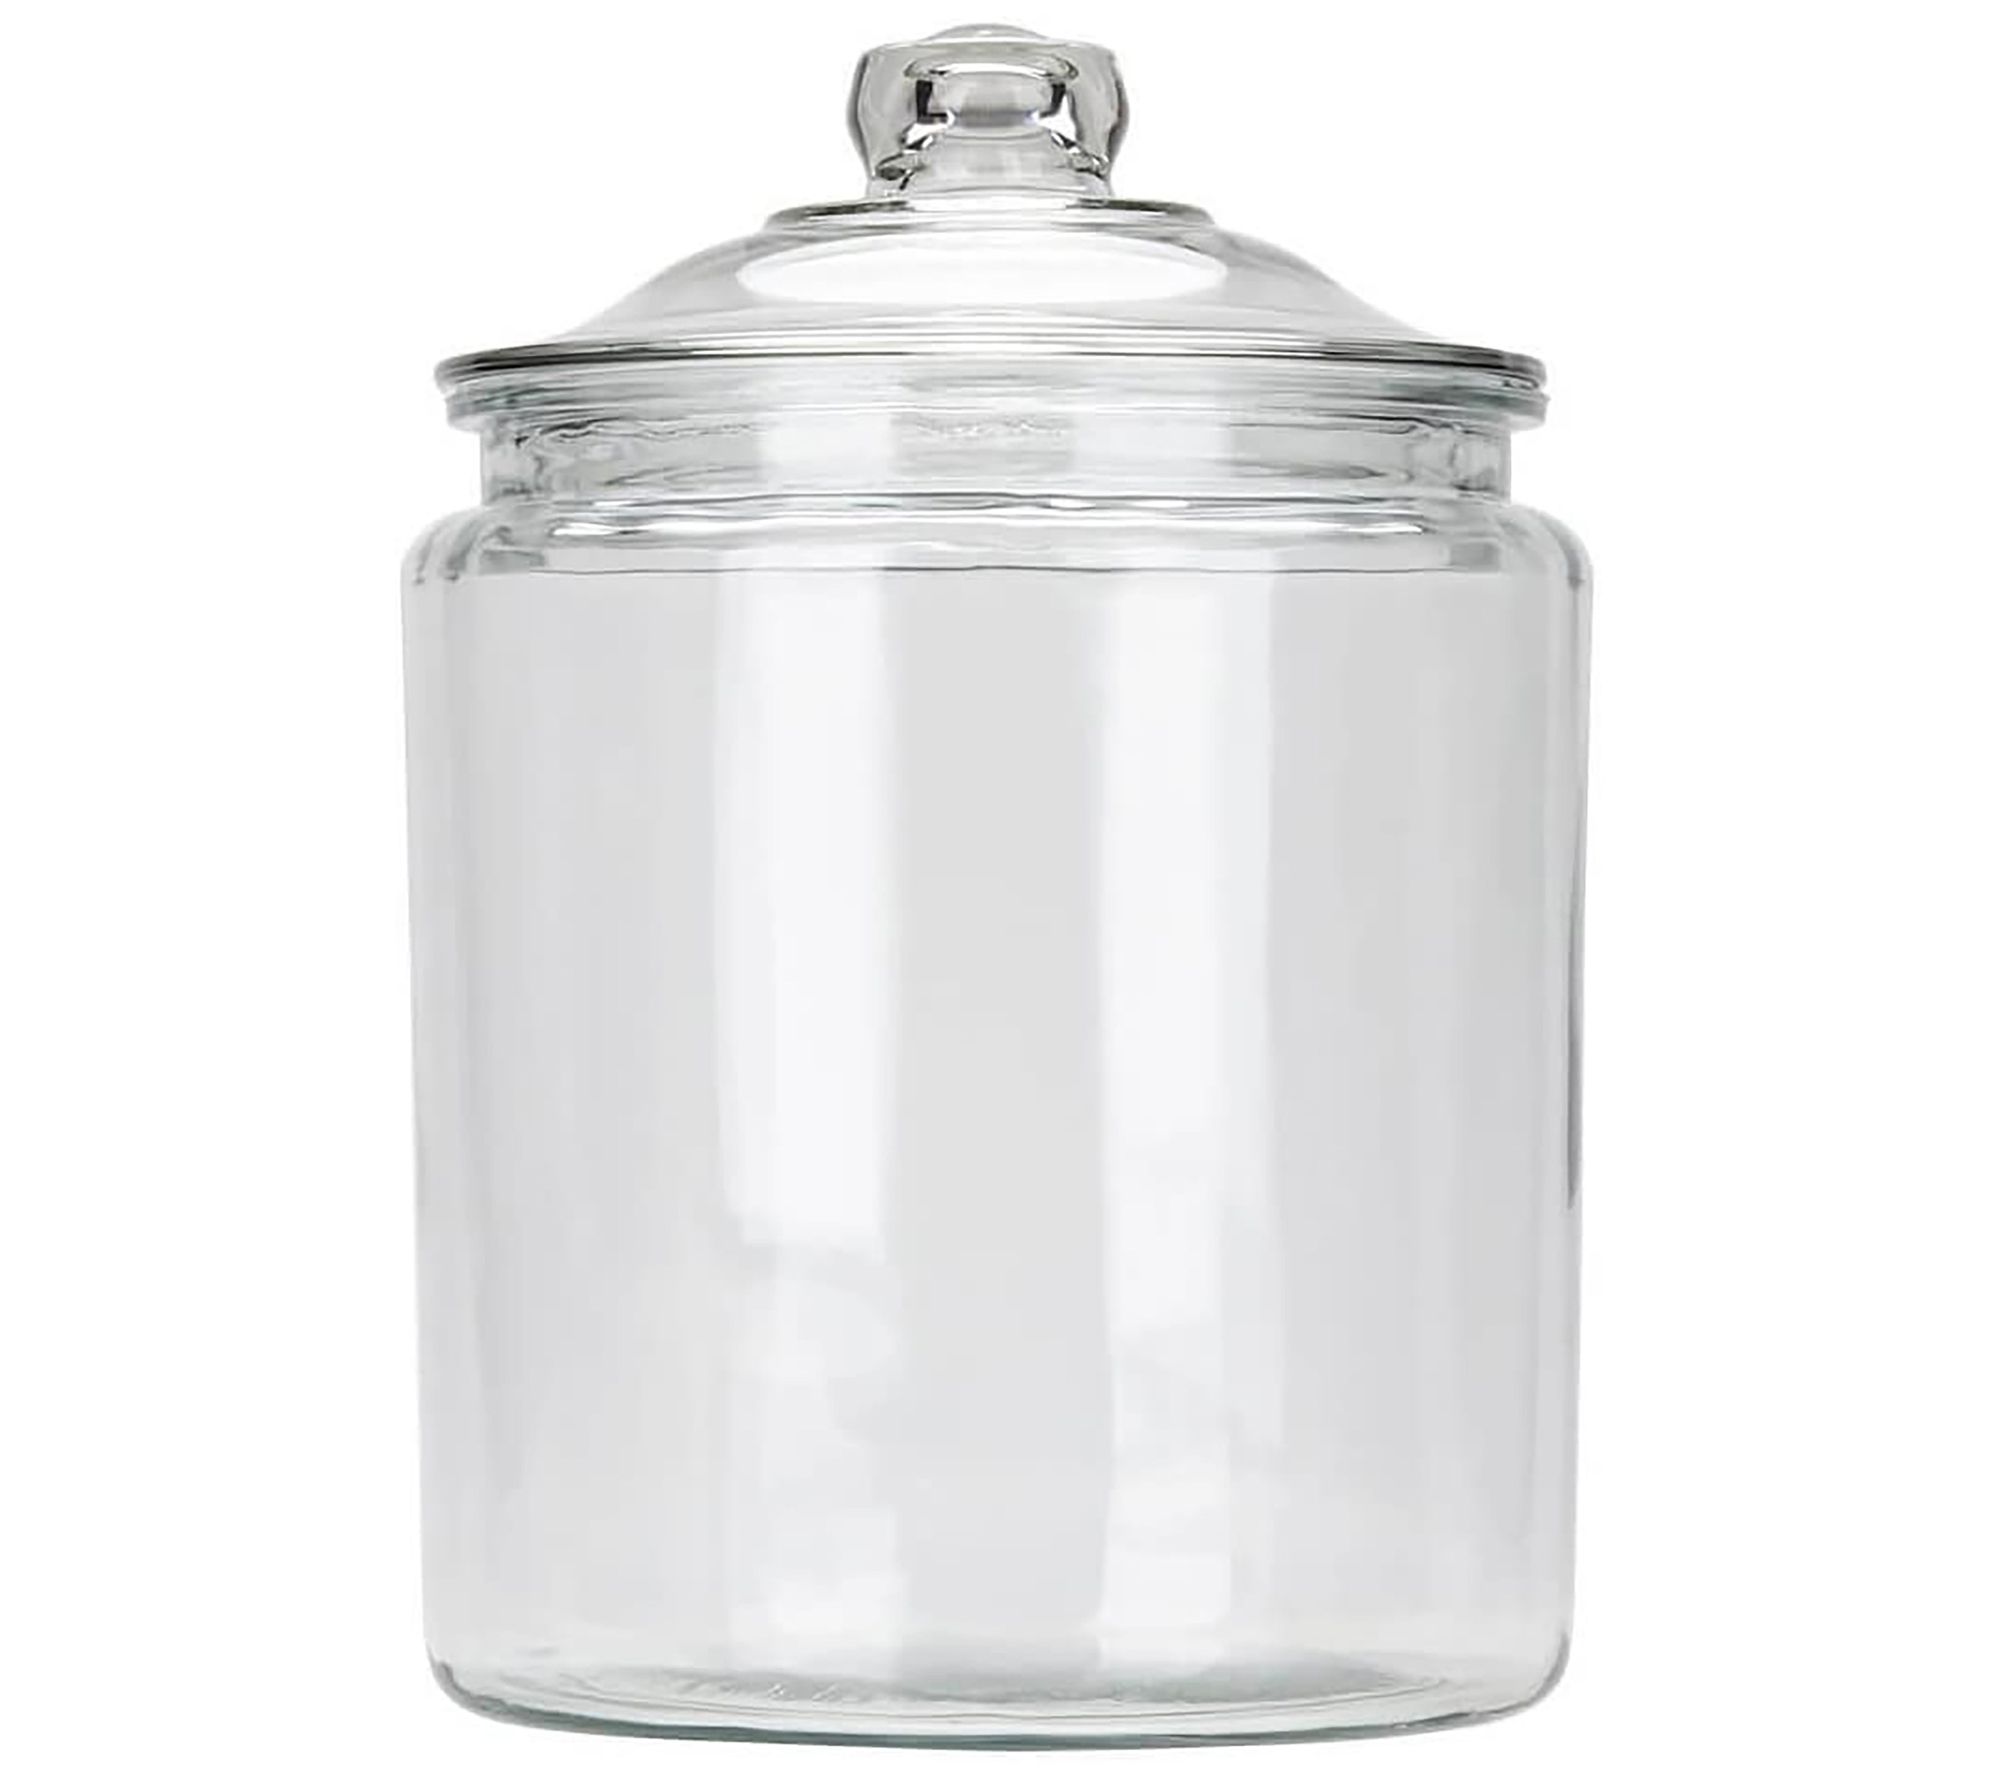 2 Gallon Anchor Heritage Hill Jar with Glass Lid - Jar Store